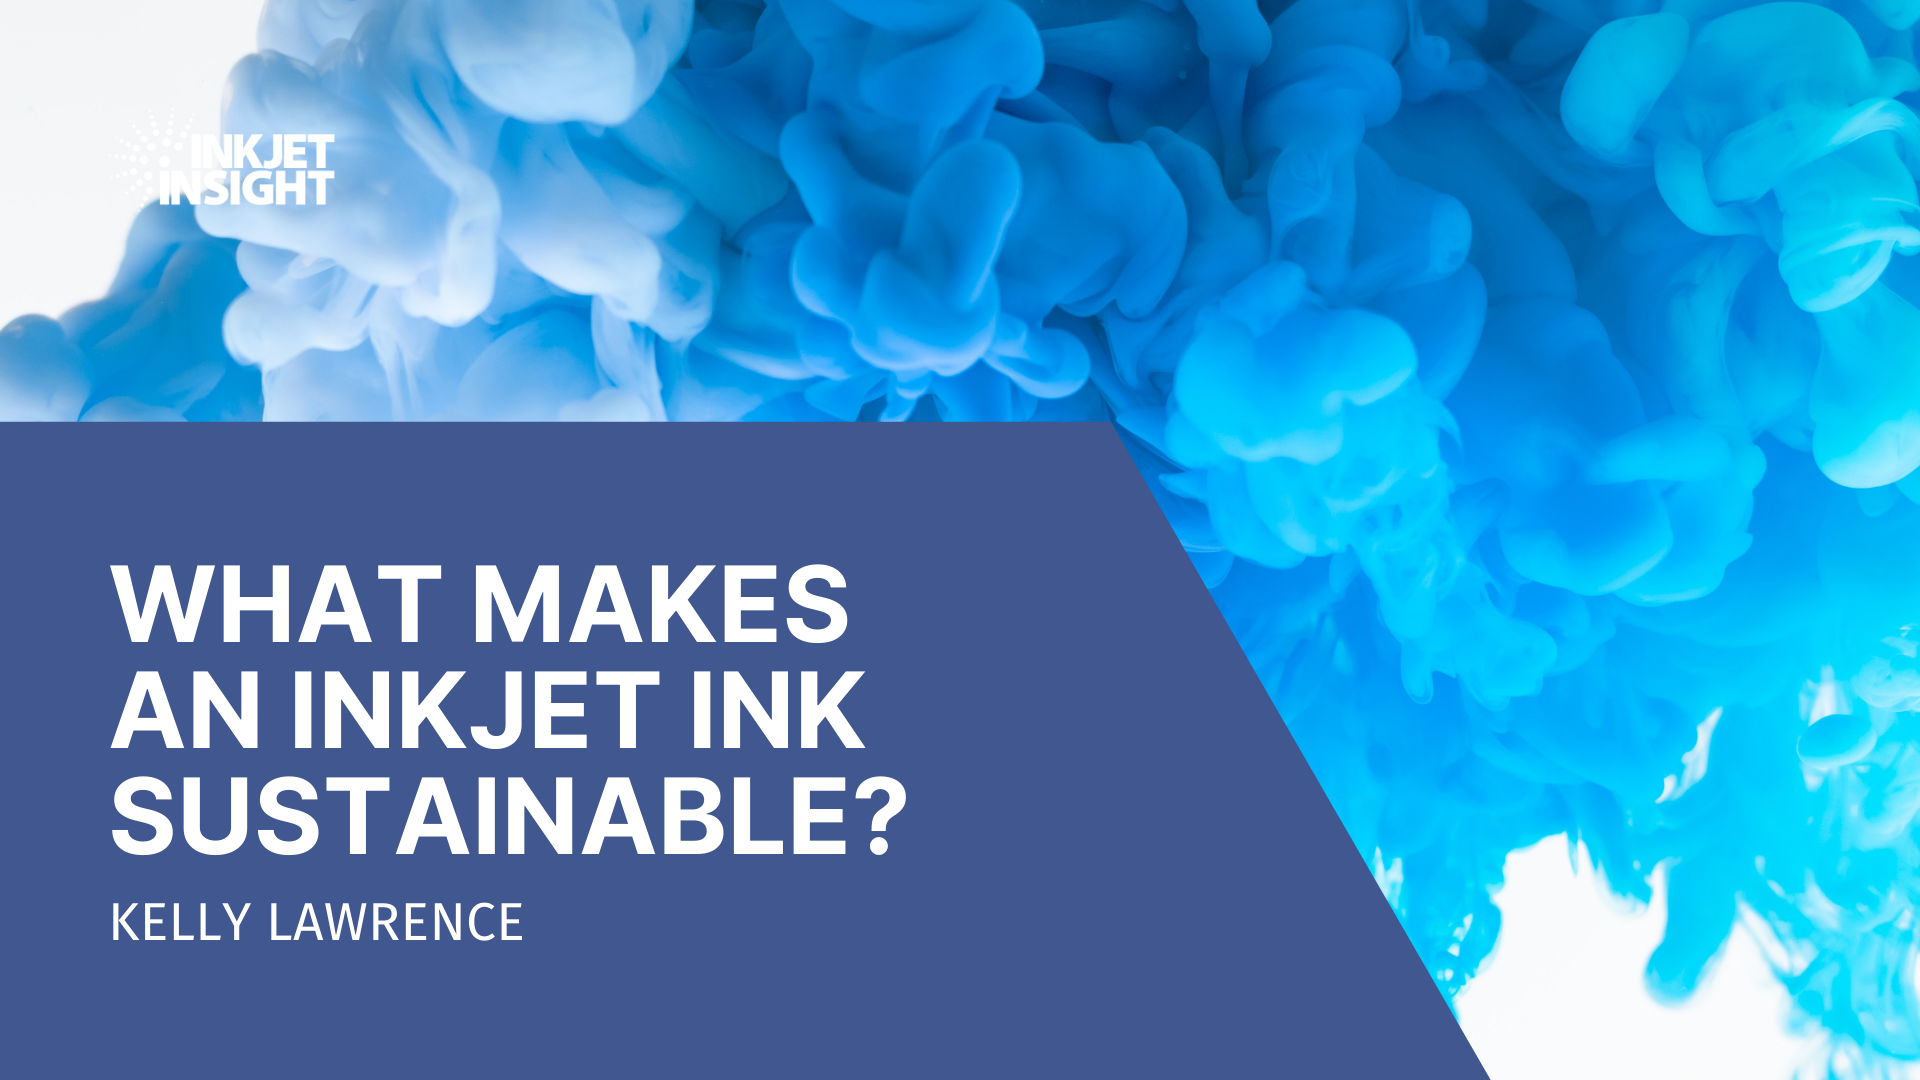 Featured image for “What Makes an Inkjet Ink Sustainable?”